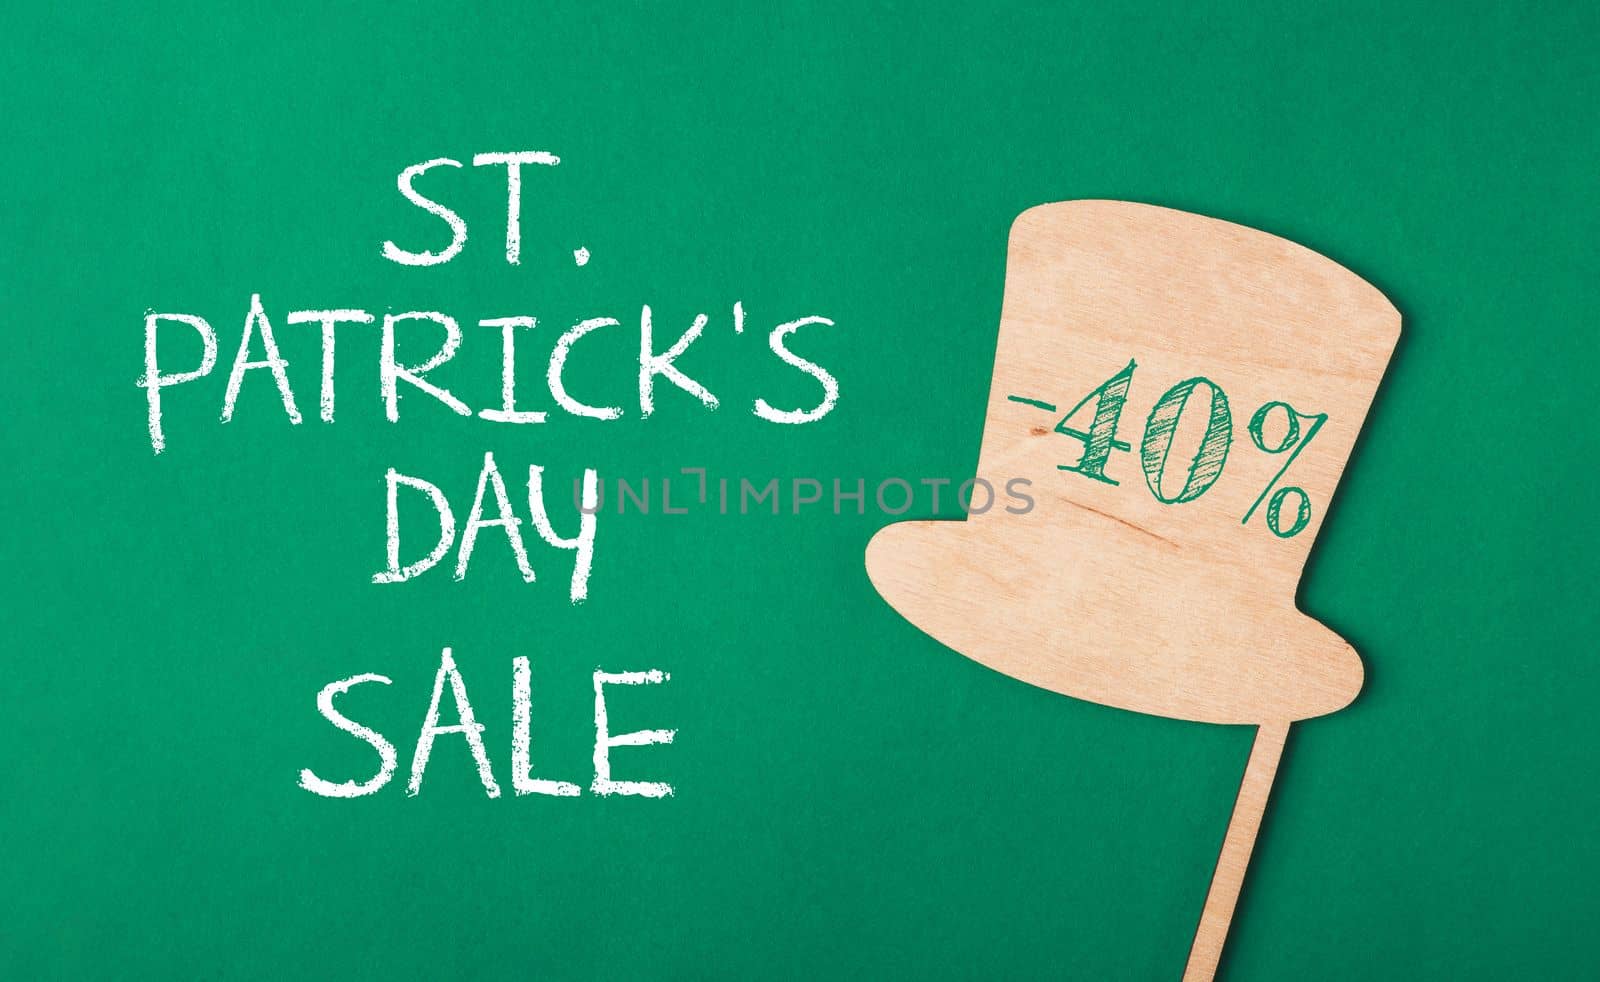 Discount -40 for St. Patrick's Day. High quality photo